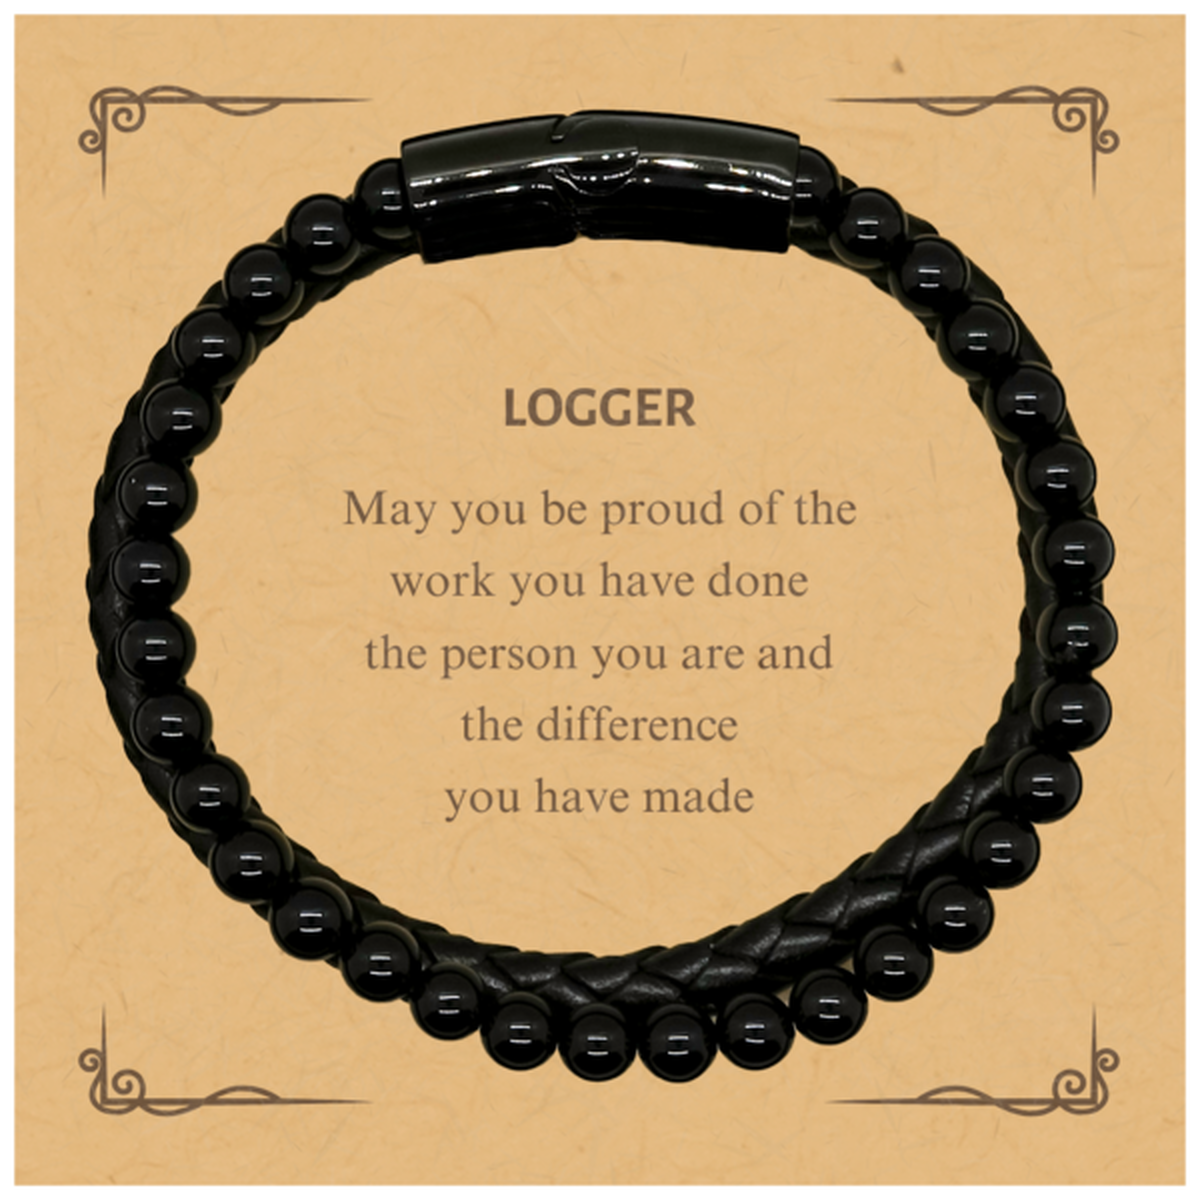 Logger May you be proud of the work you have done, Retirement Logger Stone Leather Bracelets for Colleague Appreciation Gifts Amazing for Logger